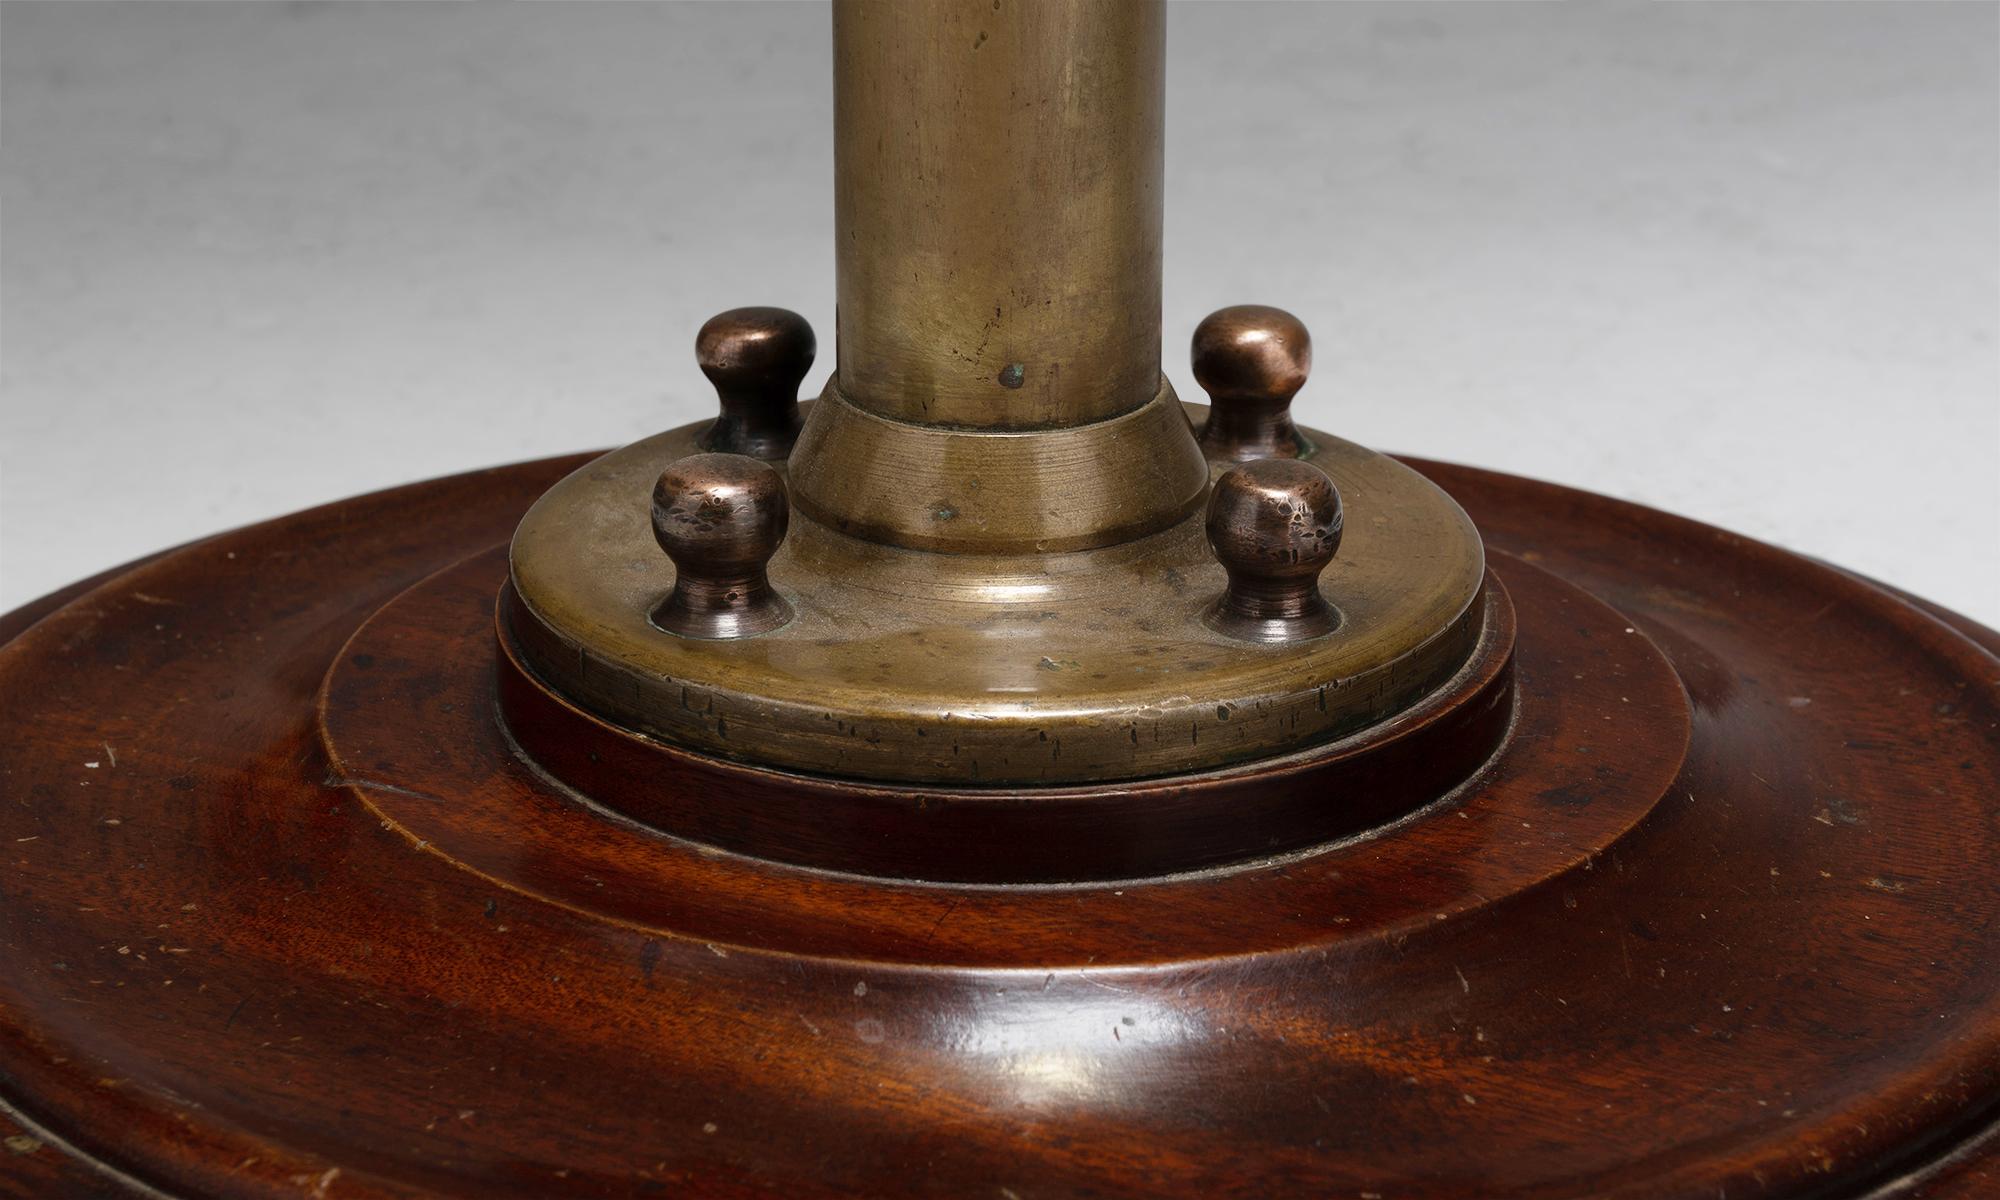 7 ' tall brass standing lamp

England Circa 1900

On carved mahogany base, with new linen shade and diffuser.

Measures: 24”W x 20”D x 86”H (with shade).